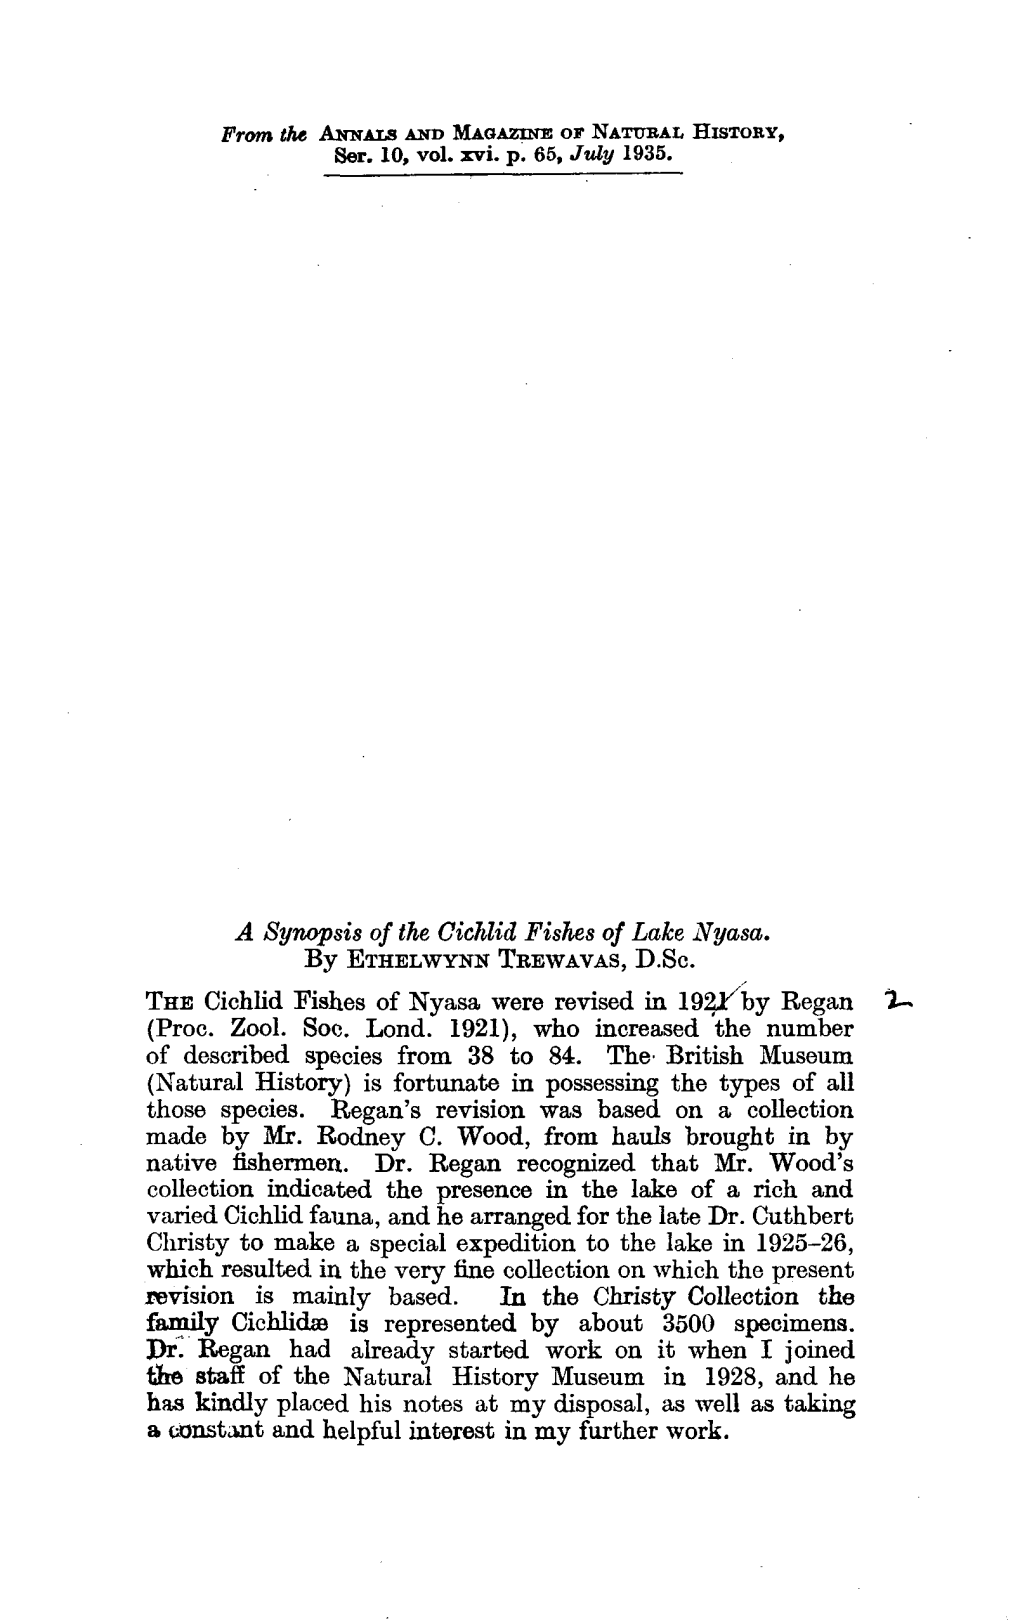 HISTORY, a Synopsis of the Cichlid Fishes of Lake Nyasa. by ETHELWYNN TREWAVAS, D.Sc. the Cichlid Fishes of Nyasa Were Revised I